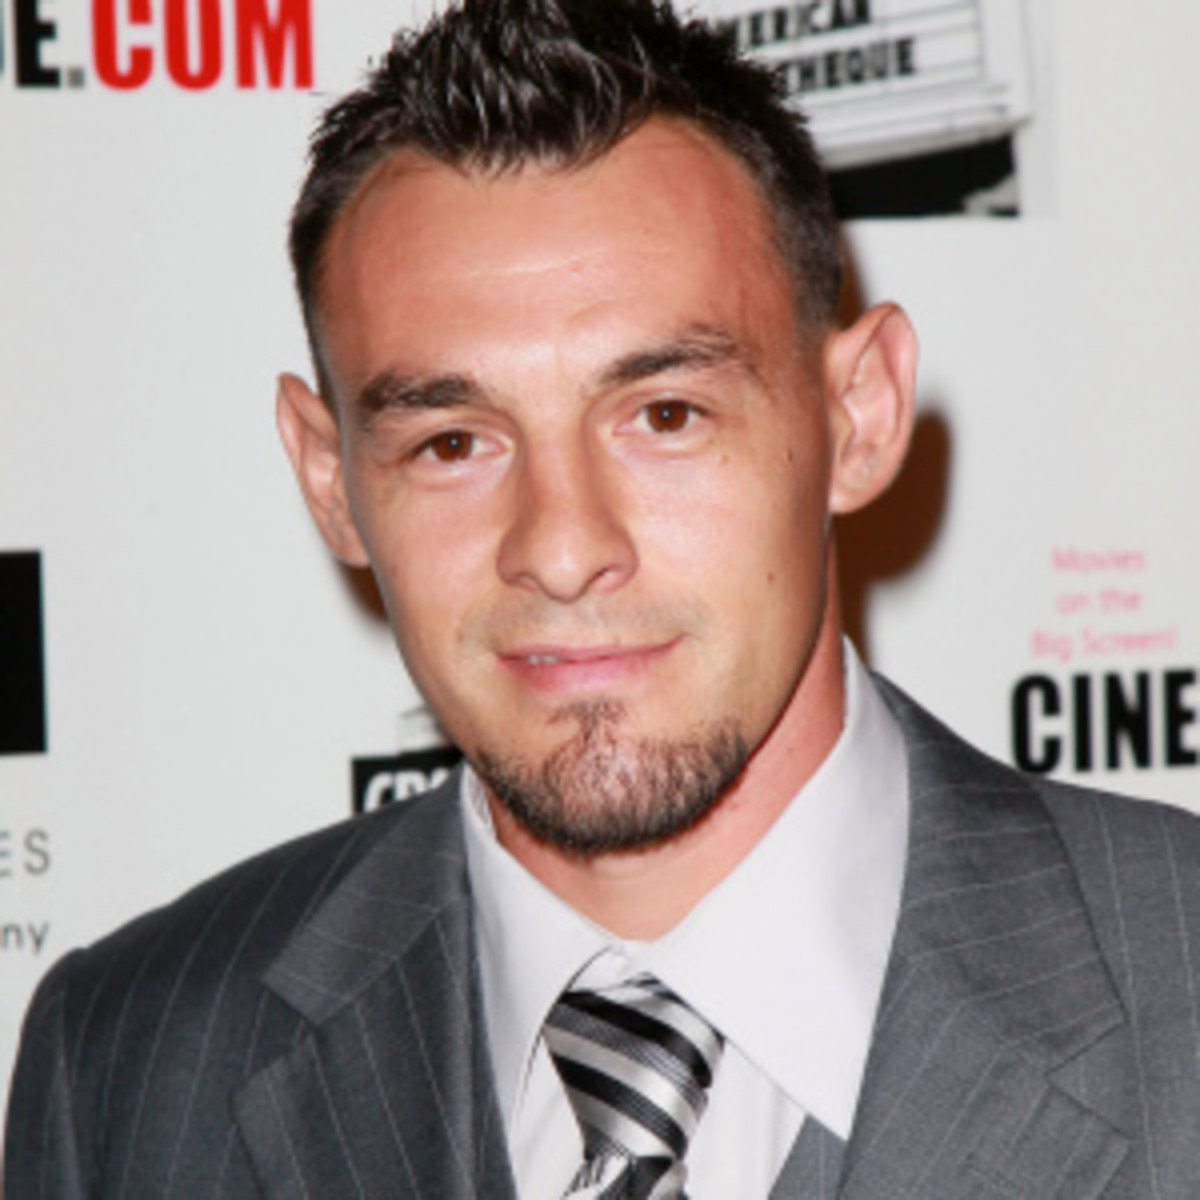 Robert Guerrero had firearms charges dismissed on Tuesday. (David Livingston/Getty Images)